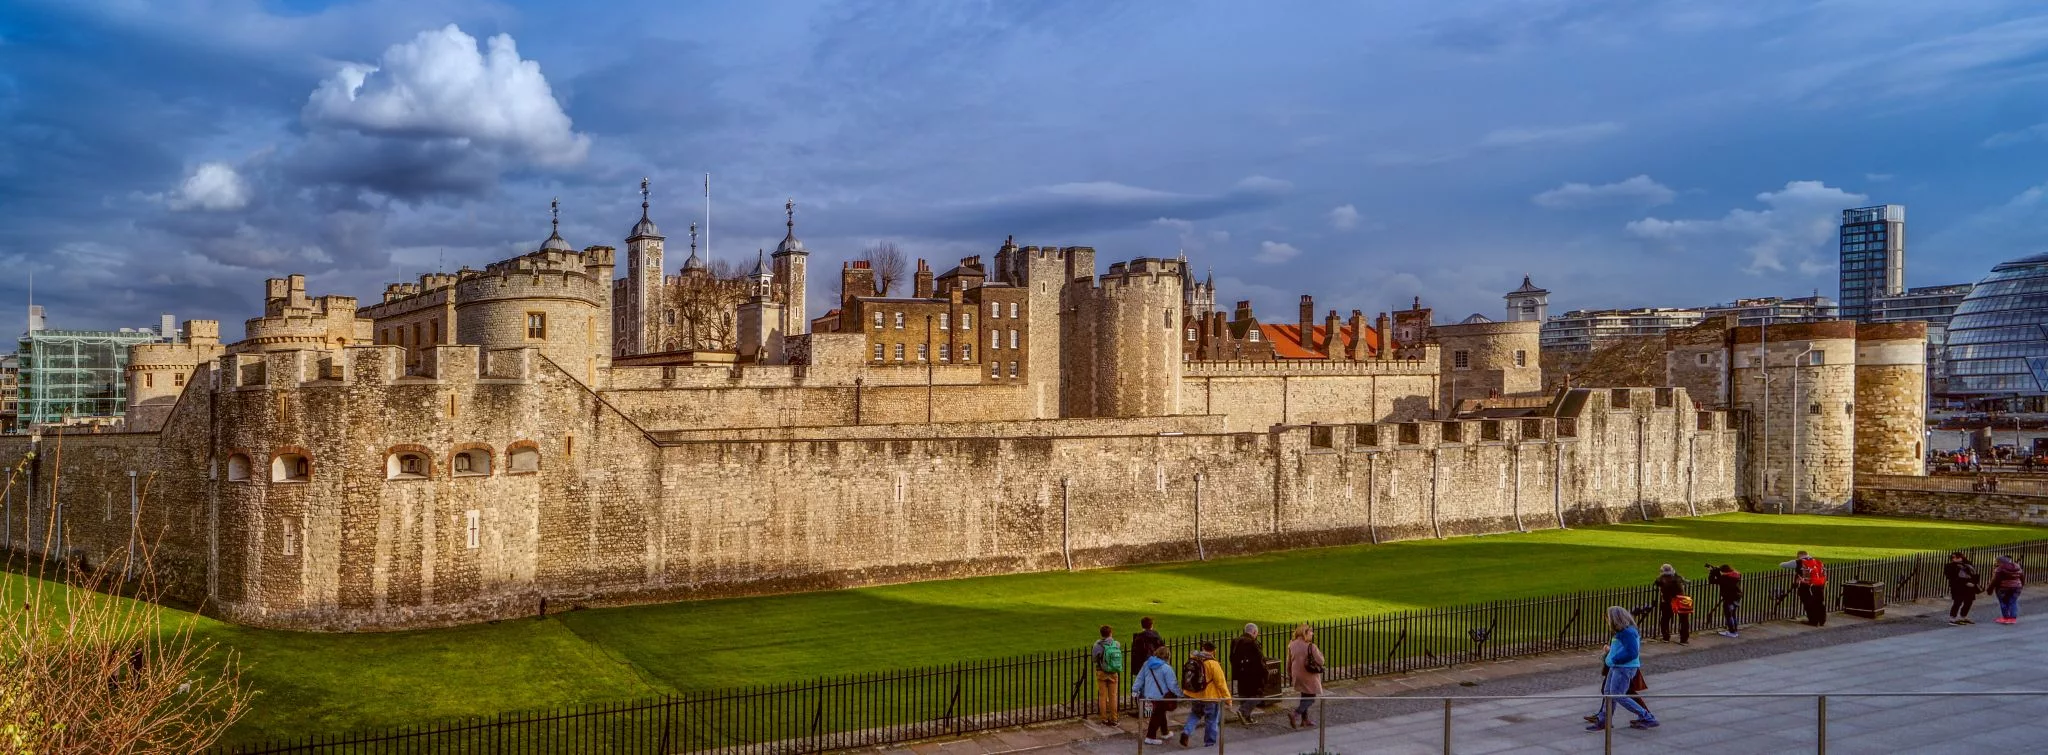 Tower of London, outside view, United Kingdom